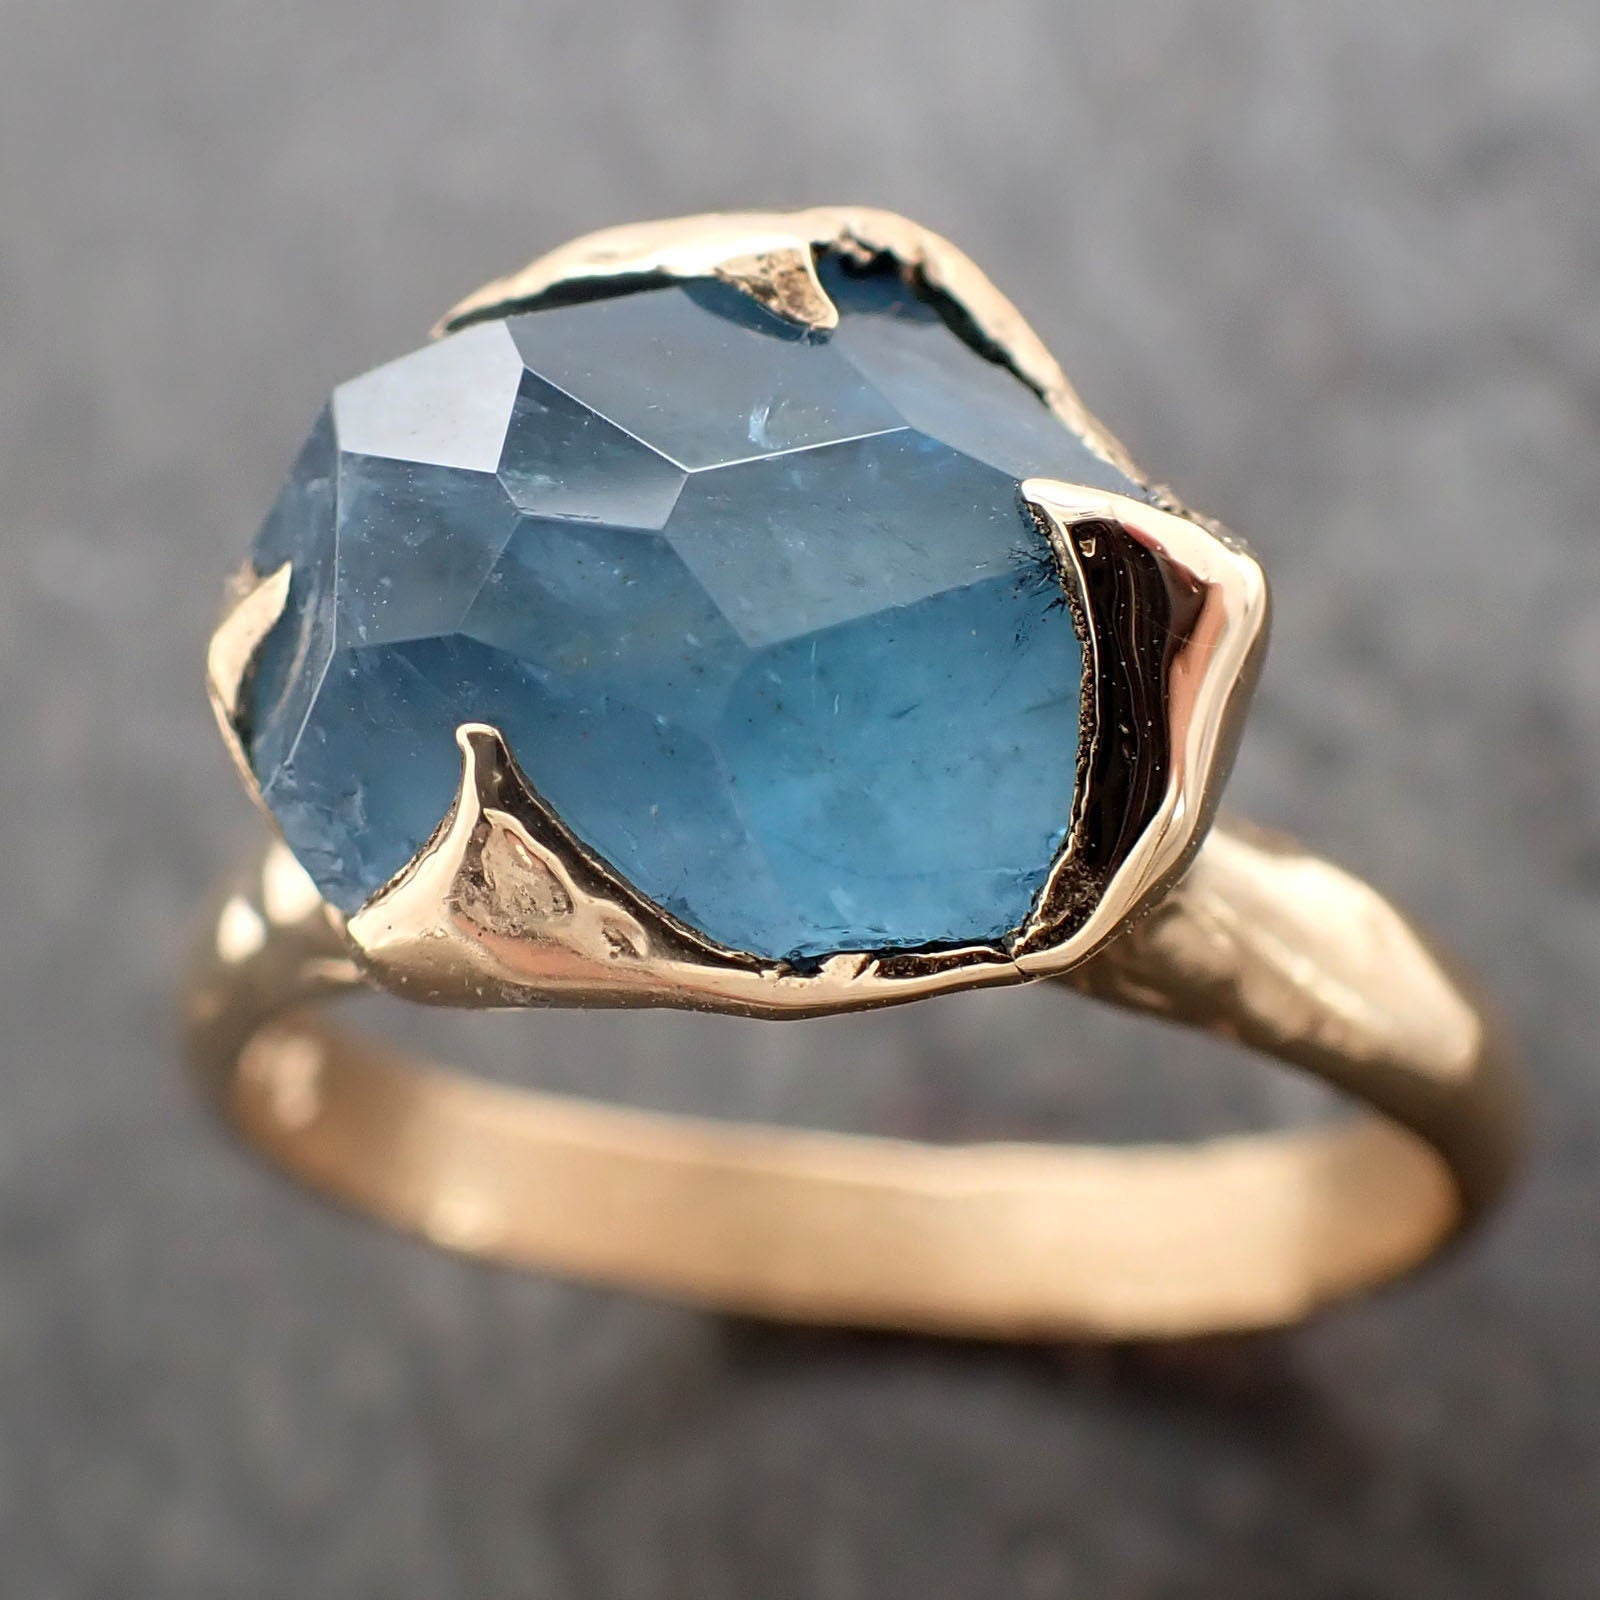 Partially faceted Aquamarine Solitaire Ring 18k gold Custom One Of a Kind Gemstone Ring Bespoke byAngeline 2983